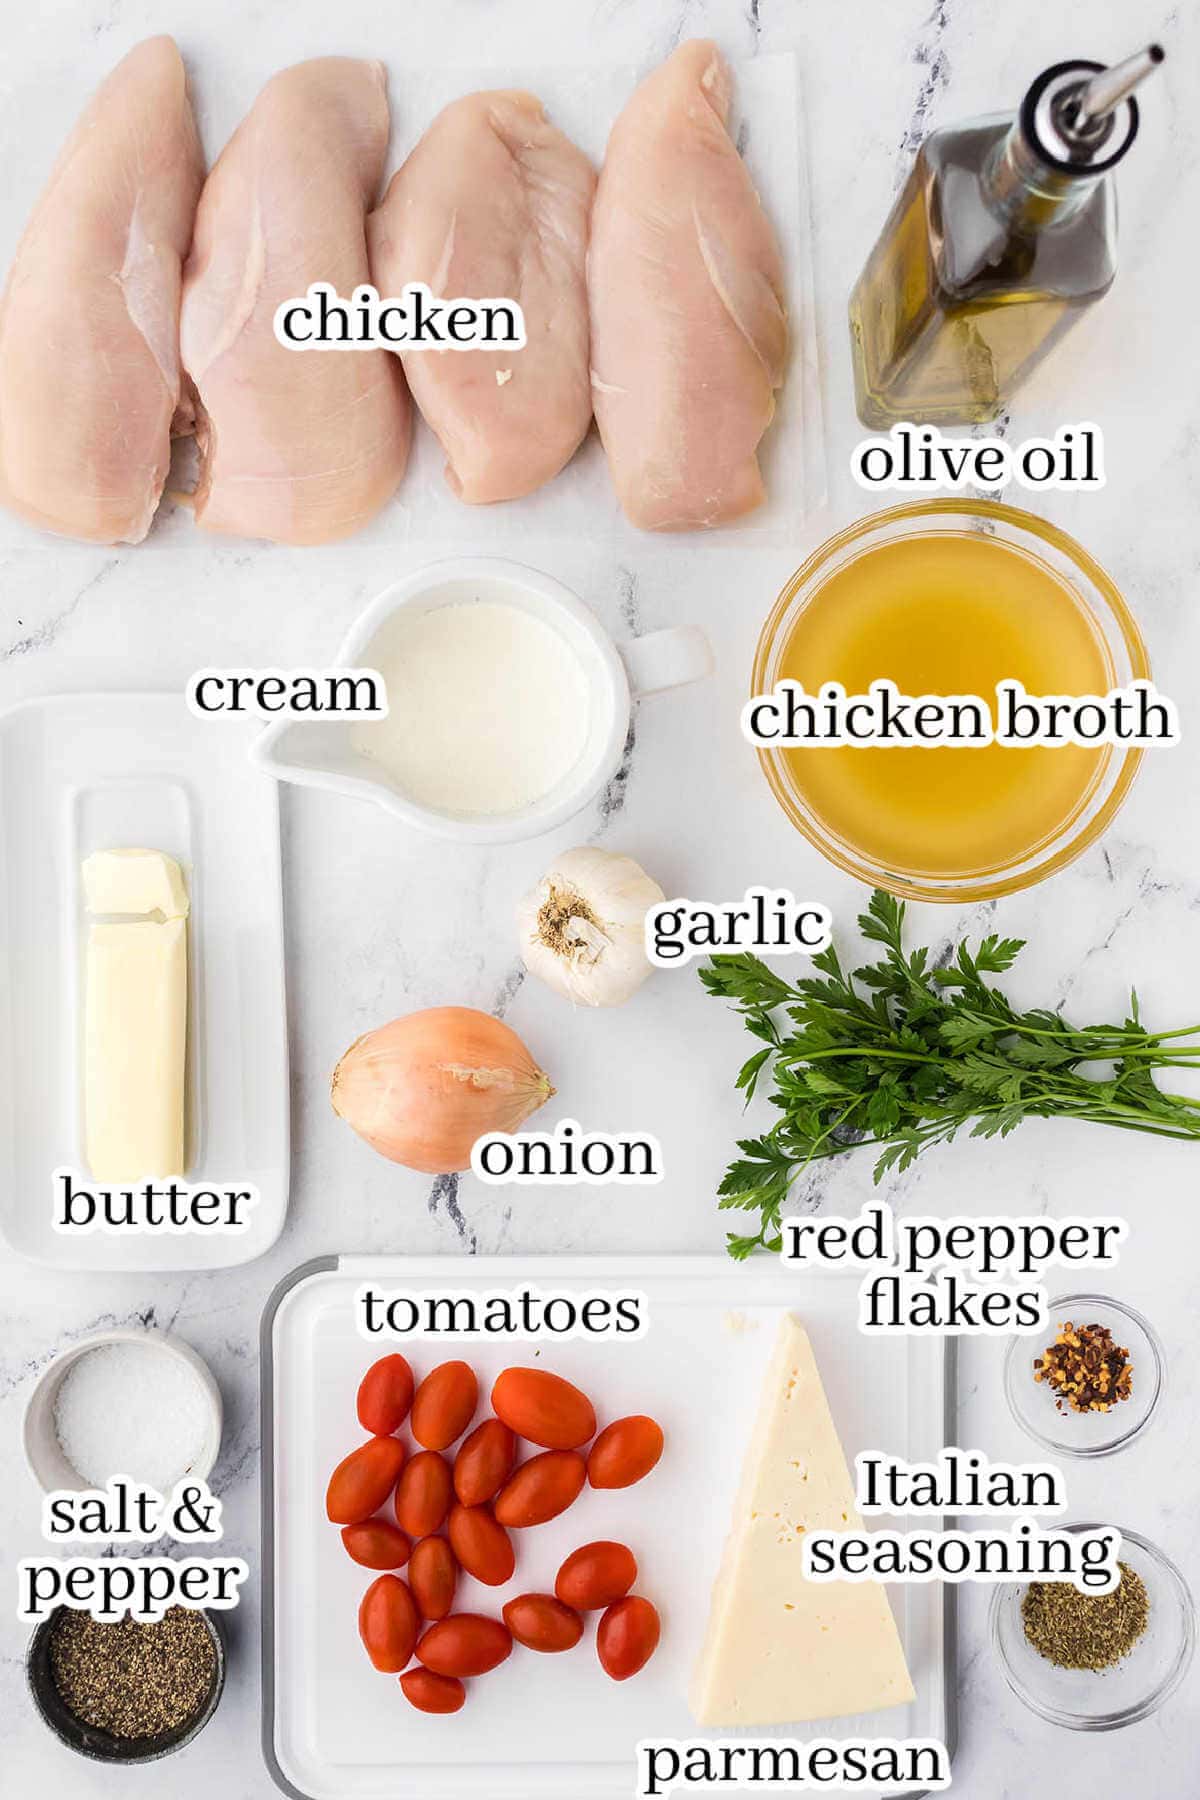 Ingredients to make the skillet chicken recipe, with print overlay.